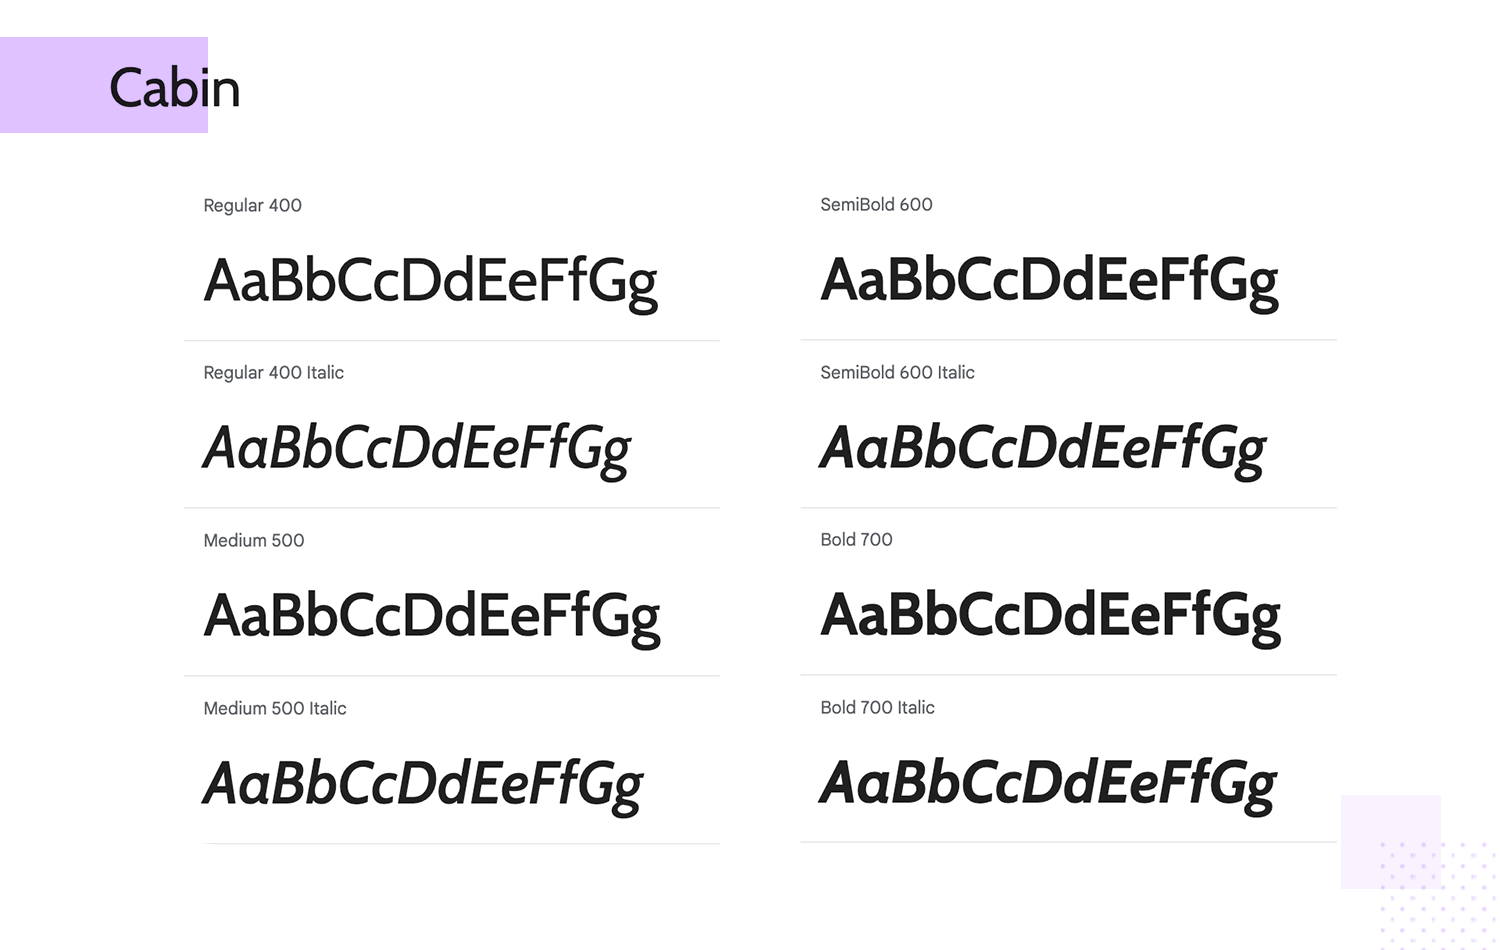 Cabin font showcase with weights from Regular 400 to Bold 700, including italics